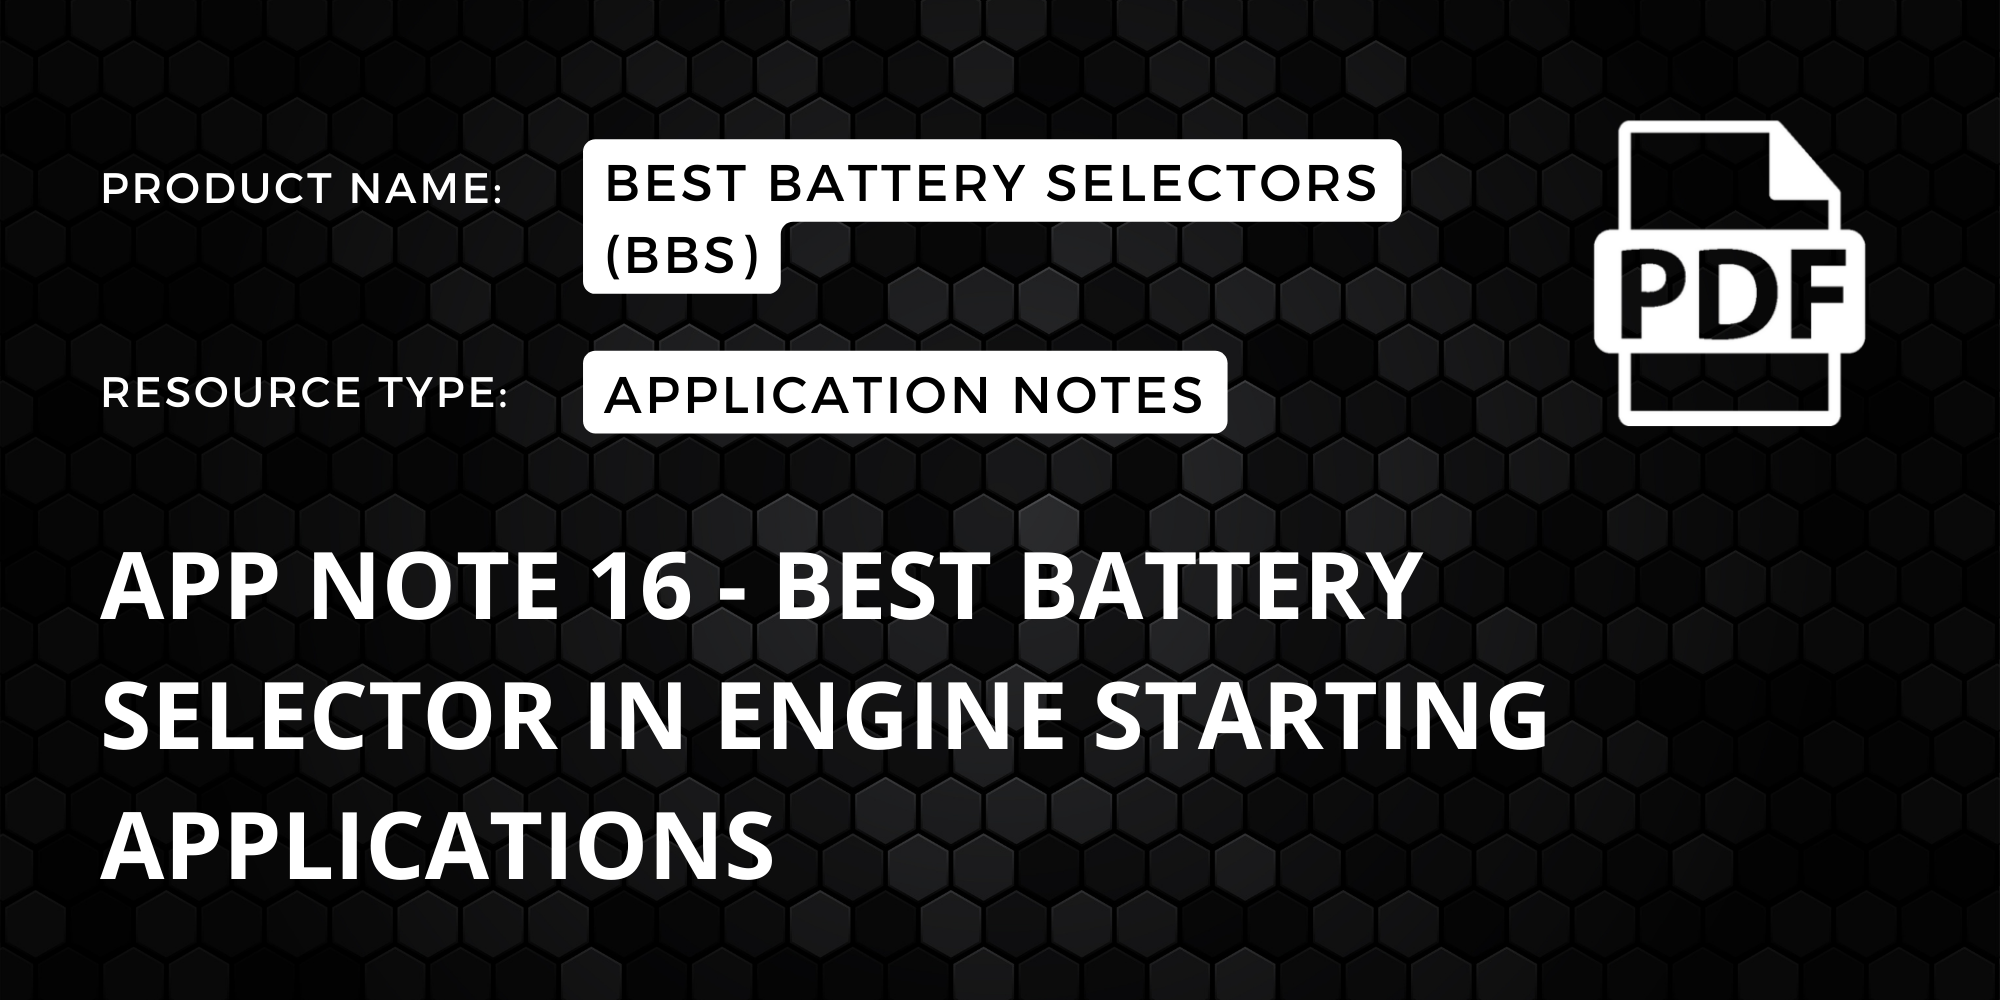 App Note 16 - Best Battery Selector in Engine Starting Applications